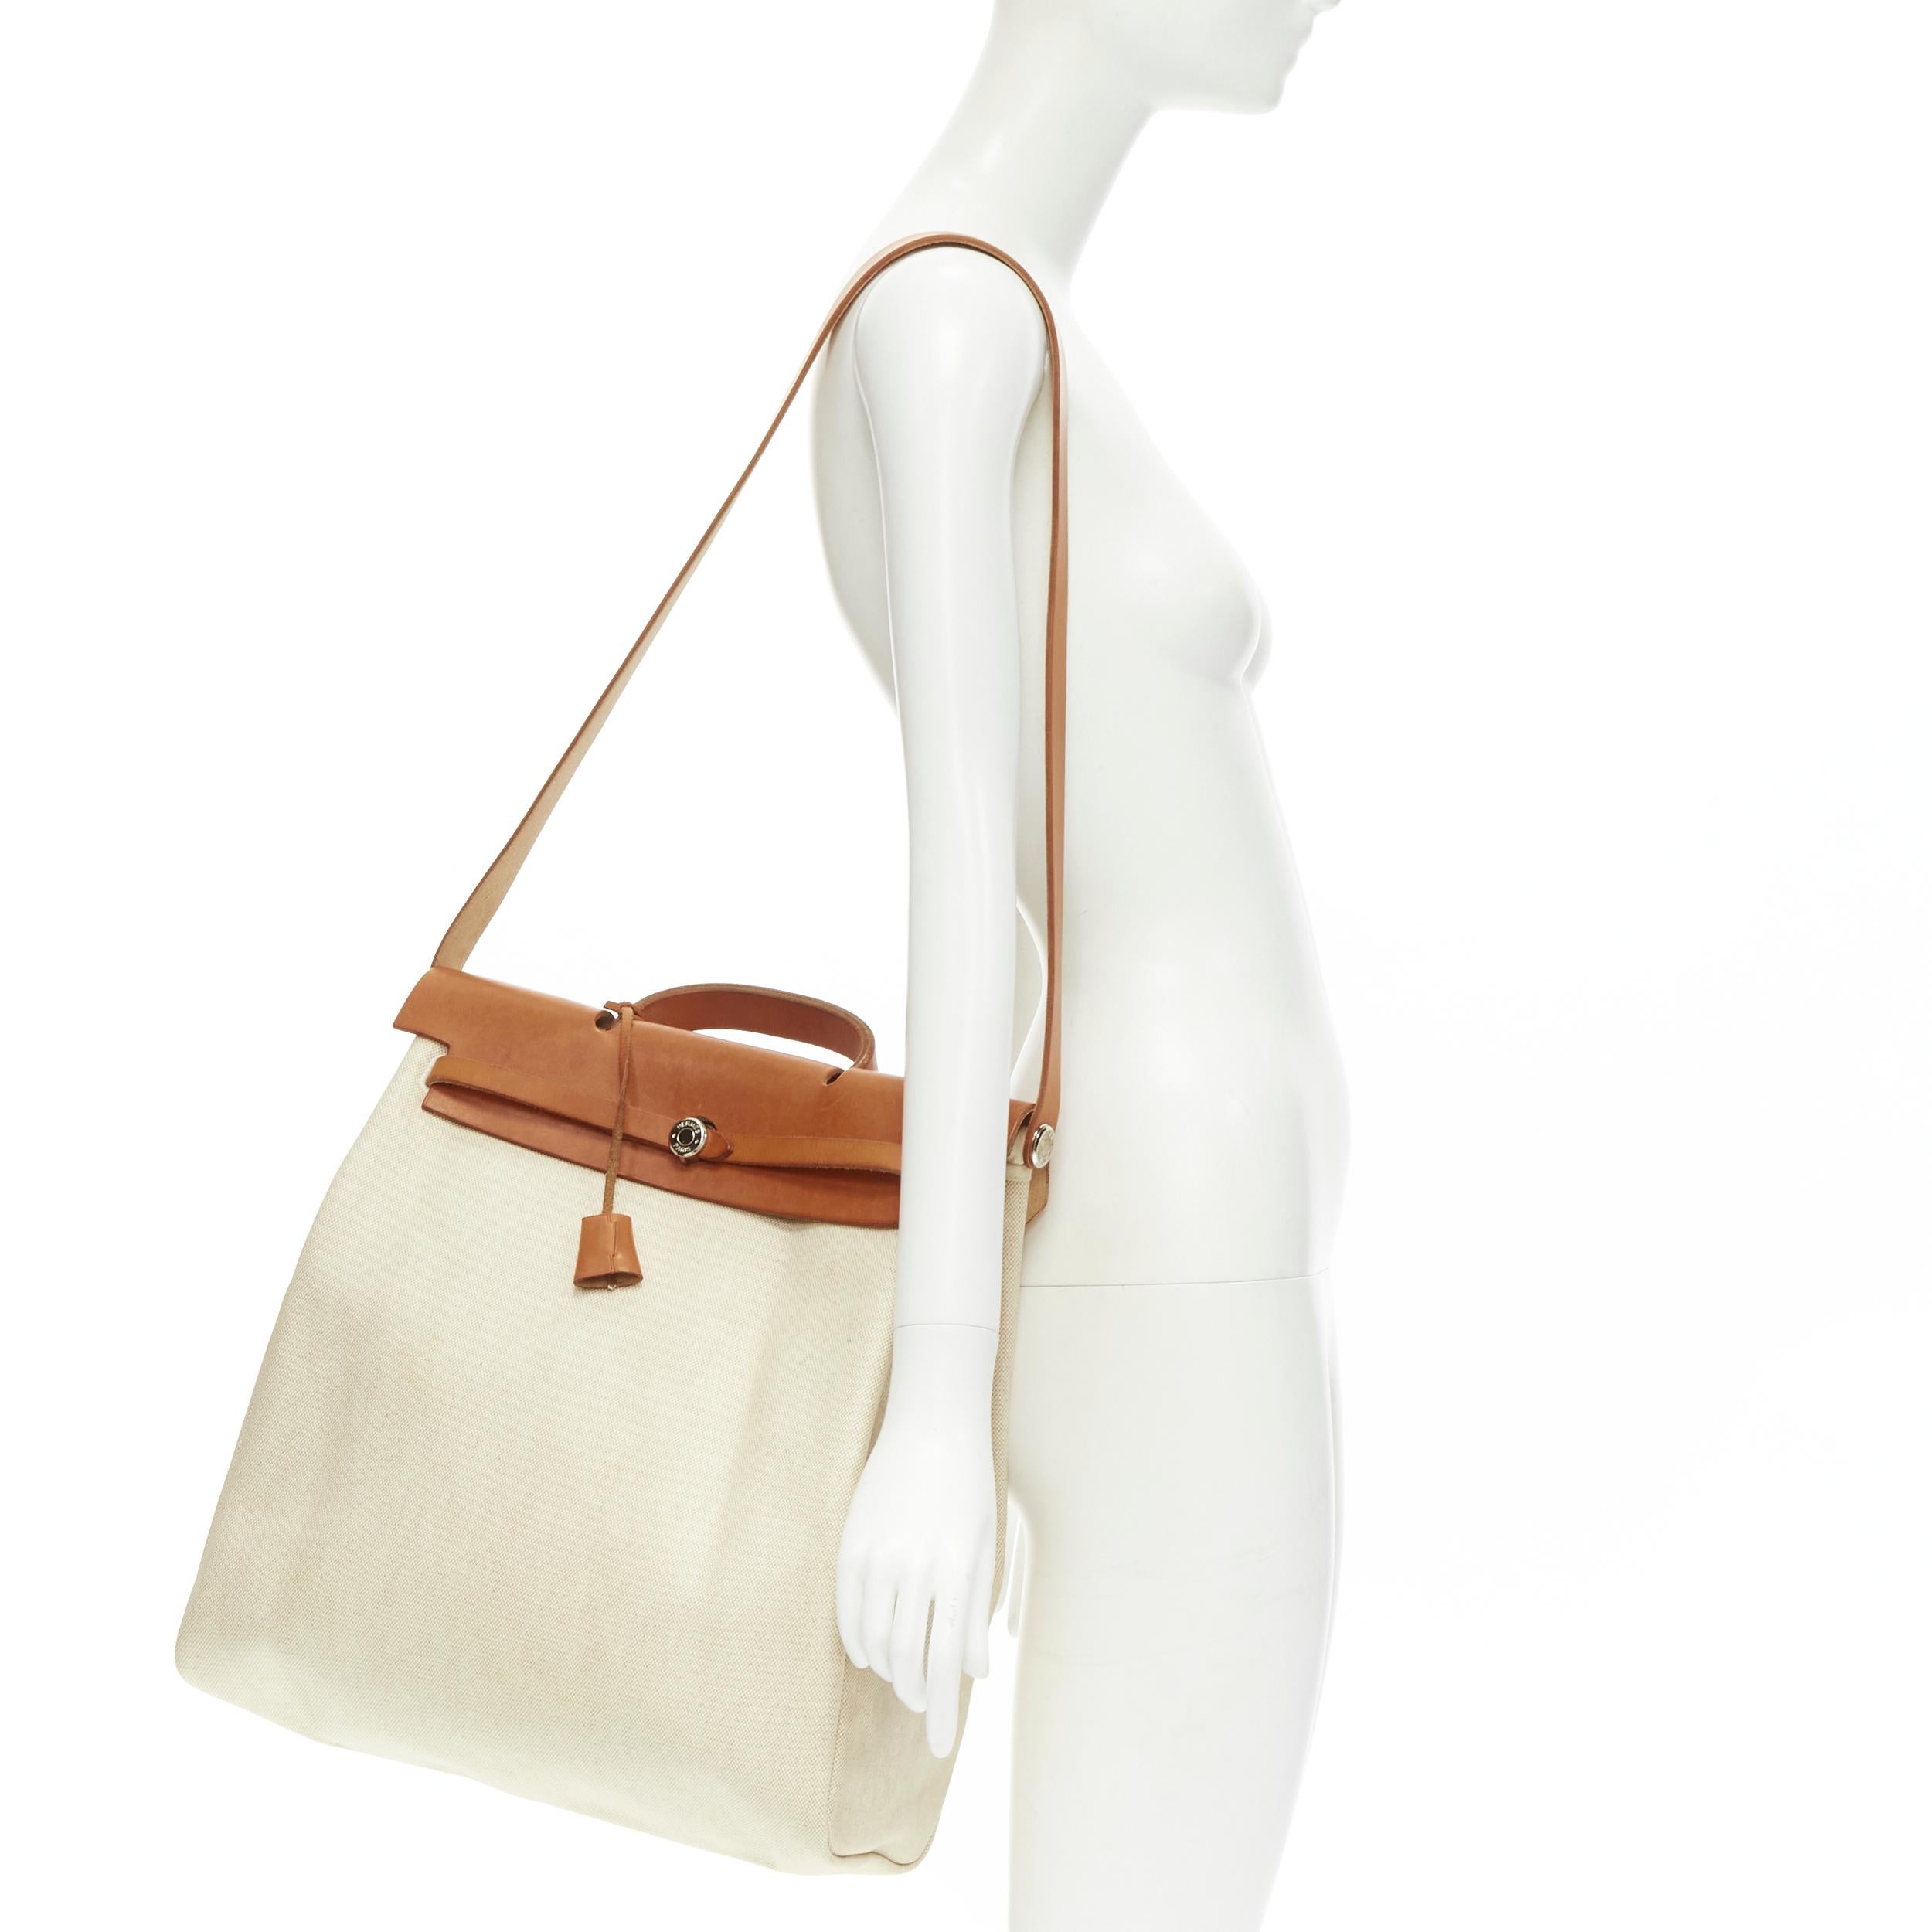 HERMES Herbag MM beige Toile coated canvas brown leather PHW 2-in-1 bag
Brand: Hermes
Model: Herbag
Material: Leather
Color: Beige
Pattern: Solid
Closure: Loop Through
Extra Detail: Beige coated canvas Toile outer. Brown calfskin leather handle.